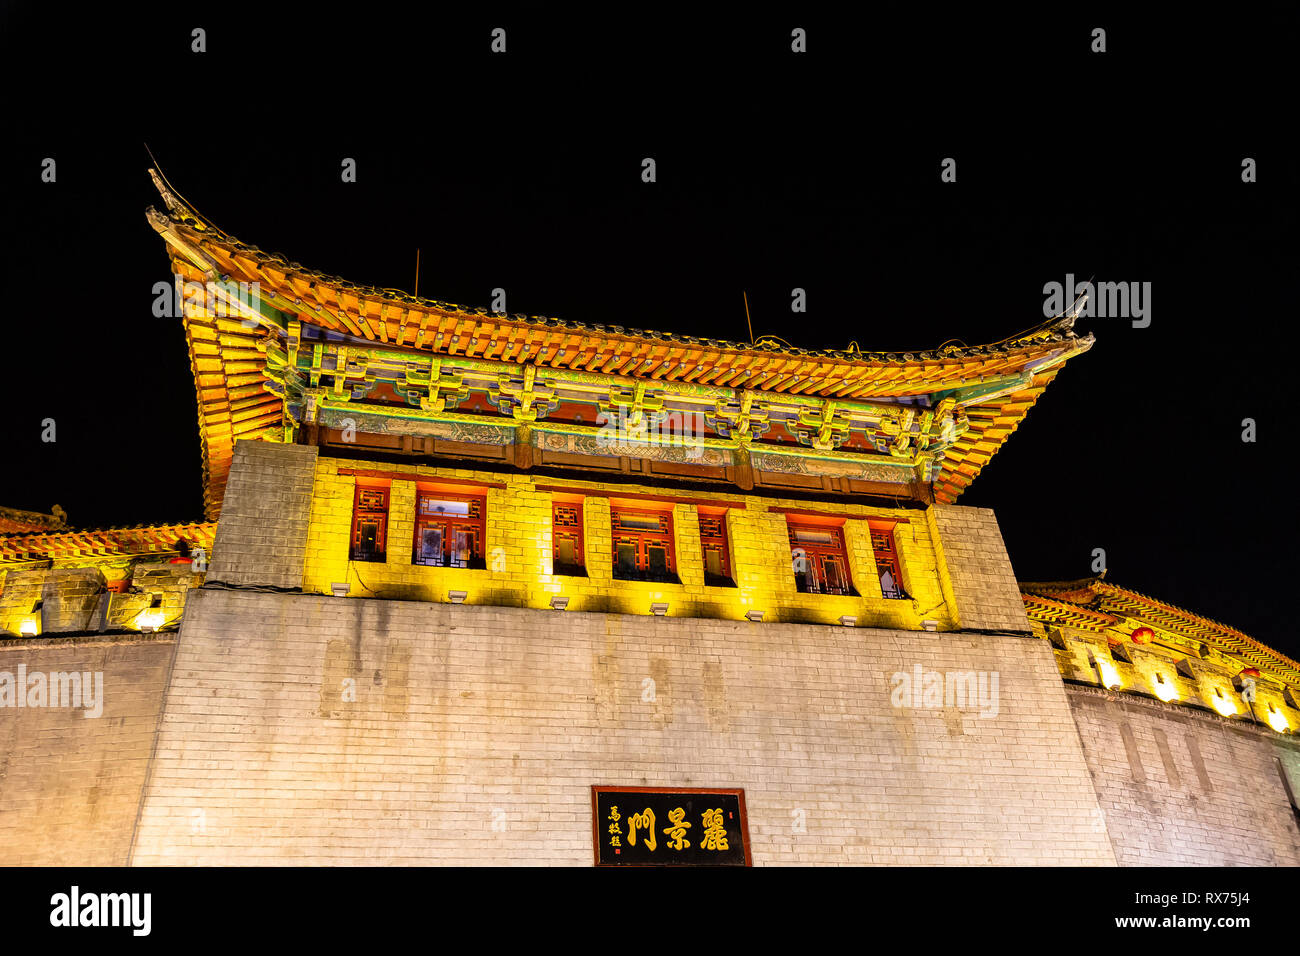 July 2016 - Luoyang, Henan province, China - Lijing gate is the fortified entrance to the old city of Luoyang Stock Photo